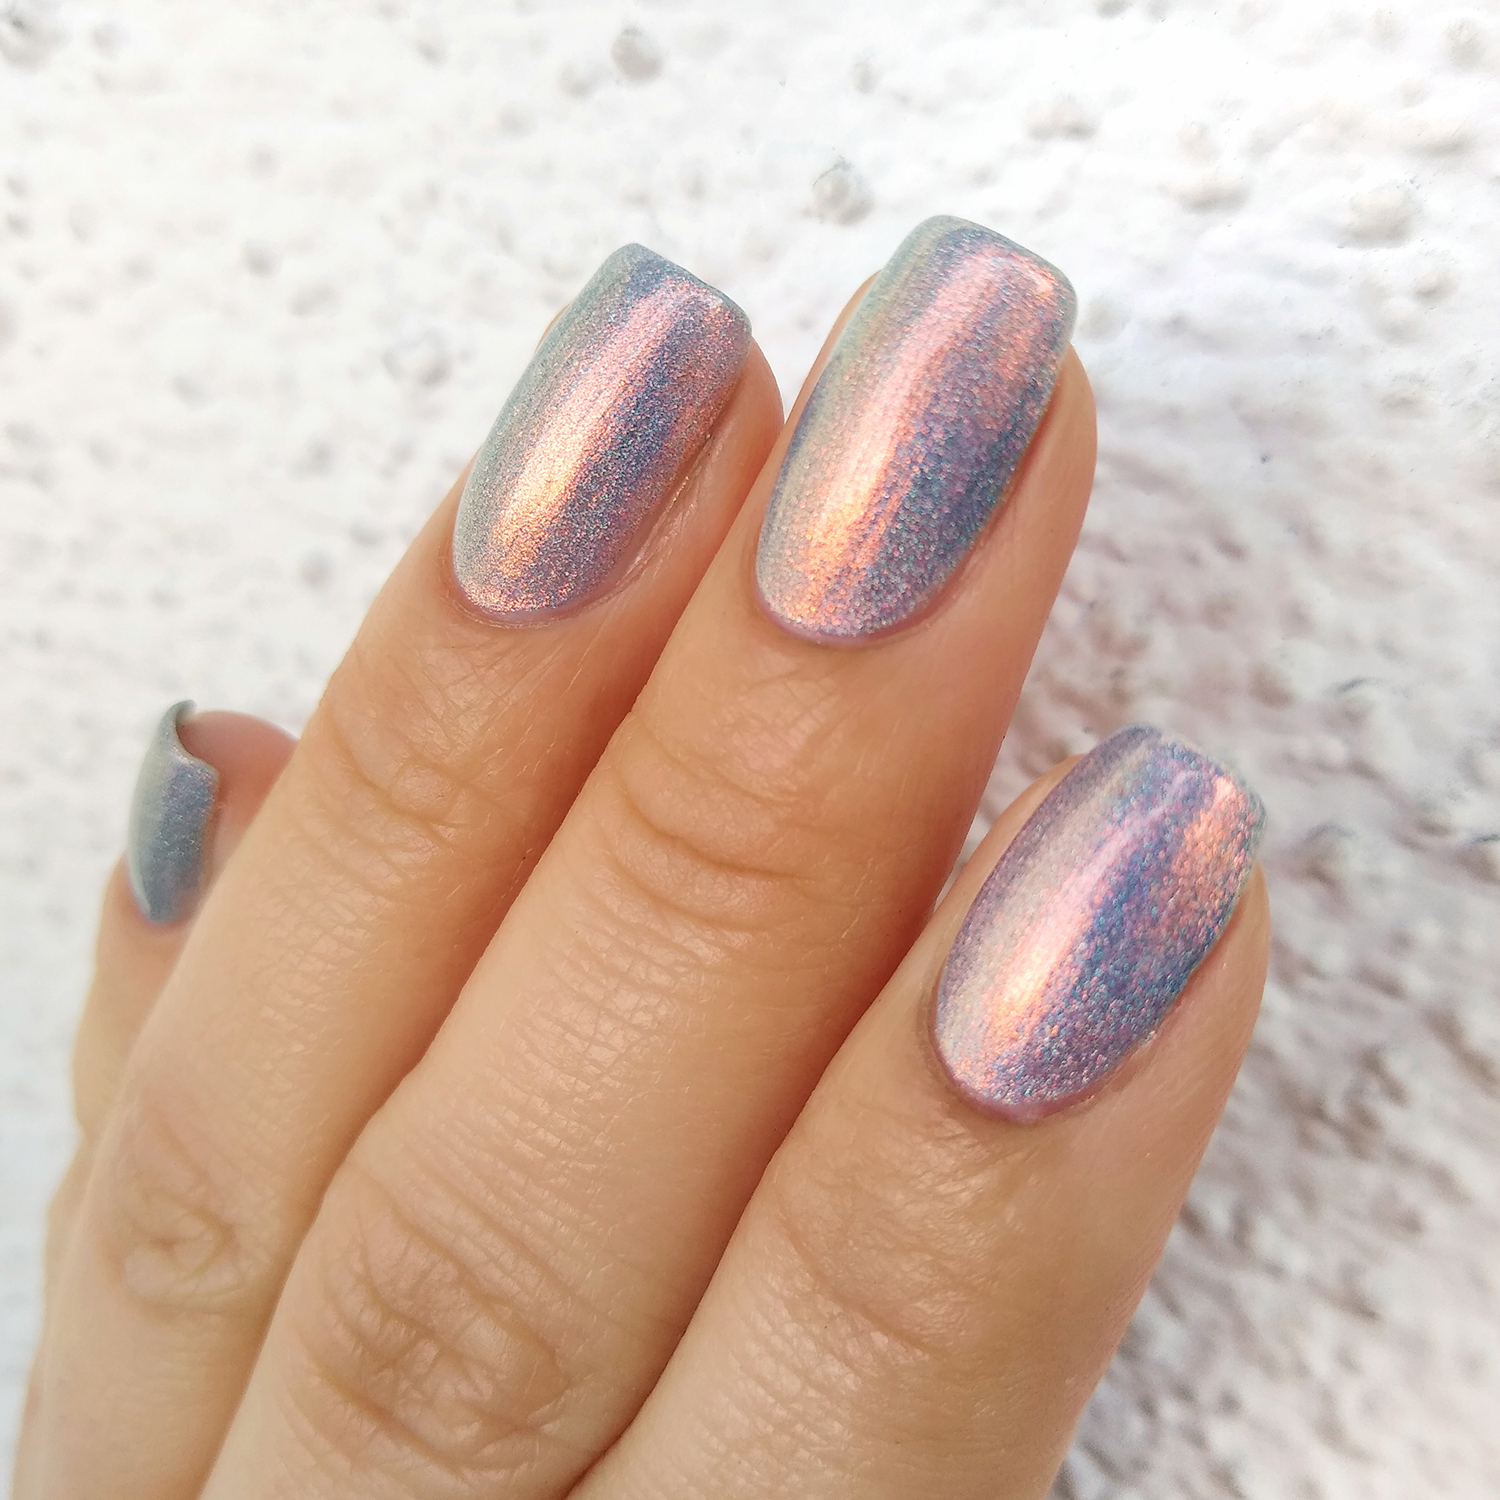 Mist Me Holographic Nail Polish by KBShimmer